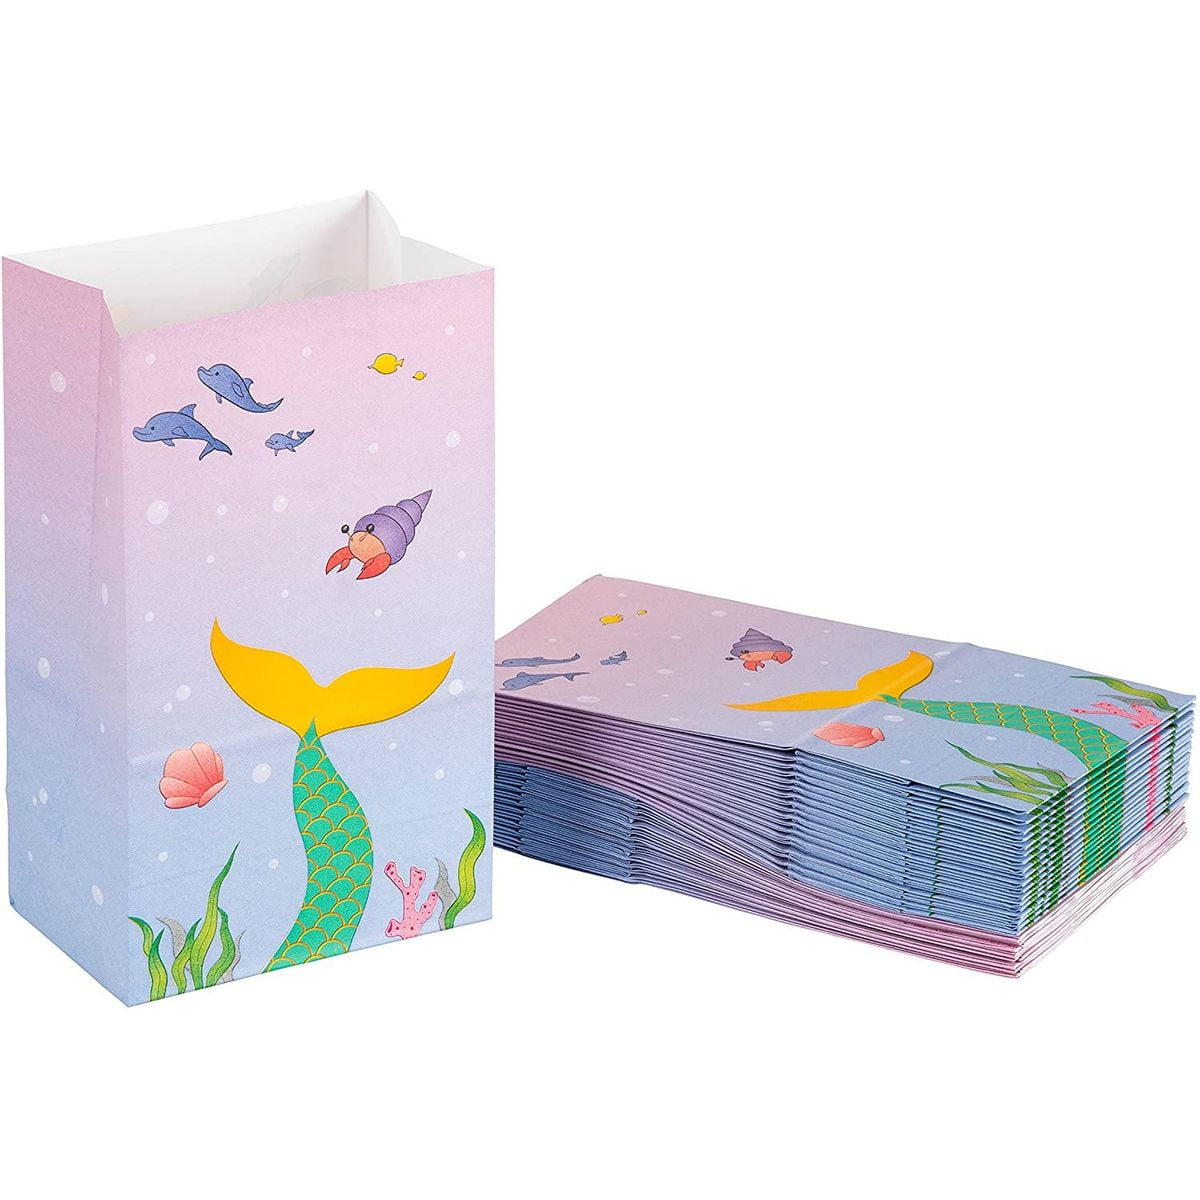 Mermaid Birthday Bday Gift Bags Kids Gift Wrapping Childrens Party Presents C 